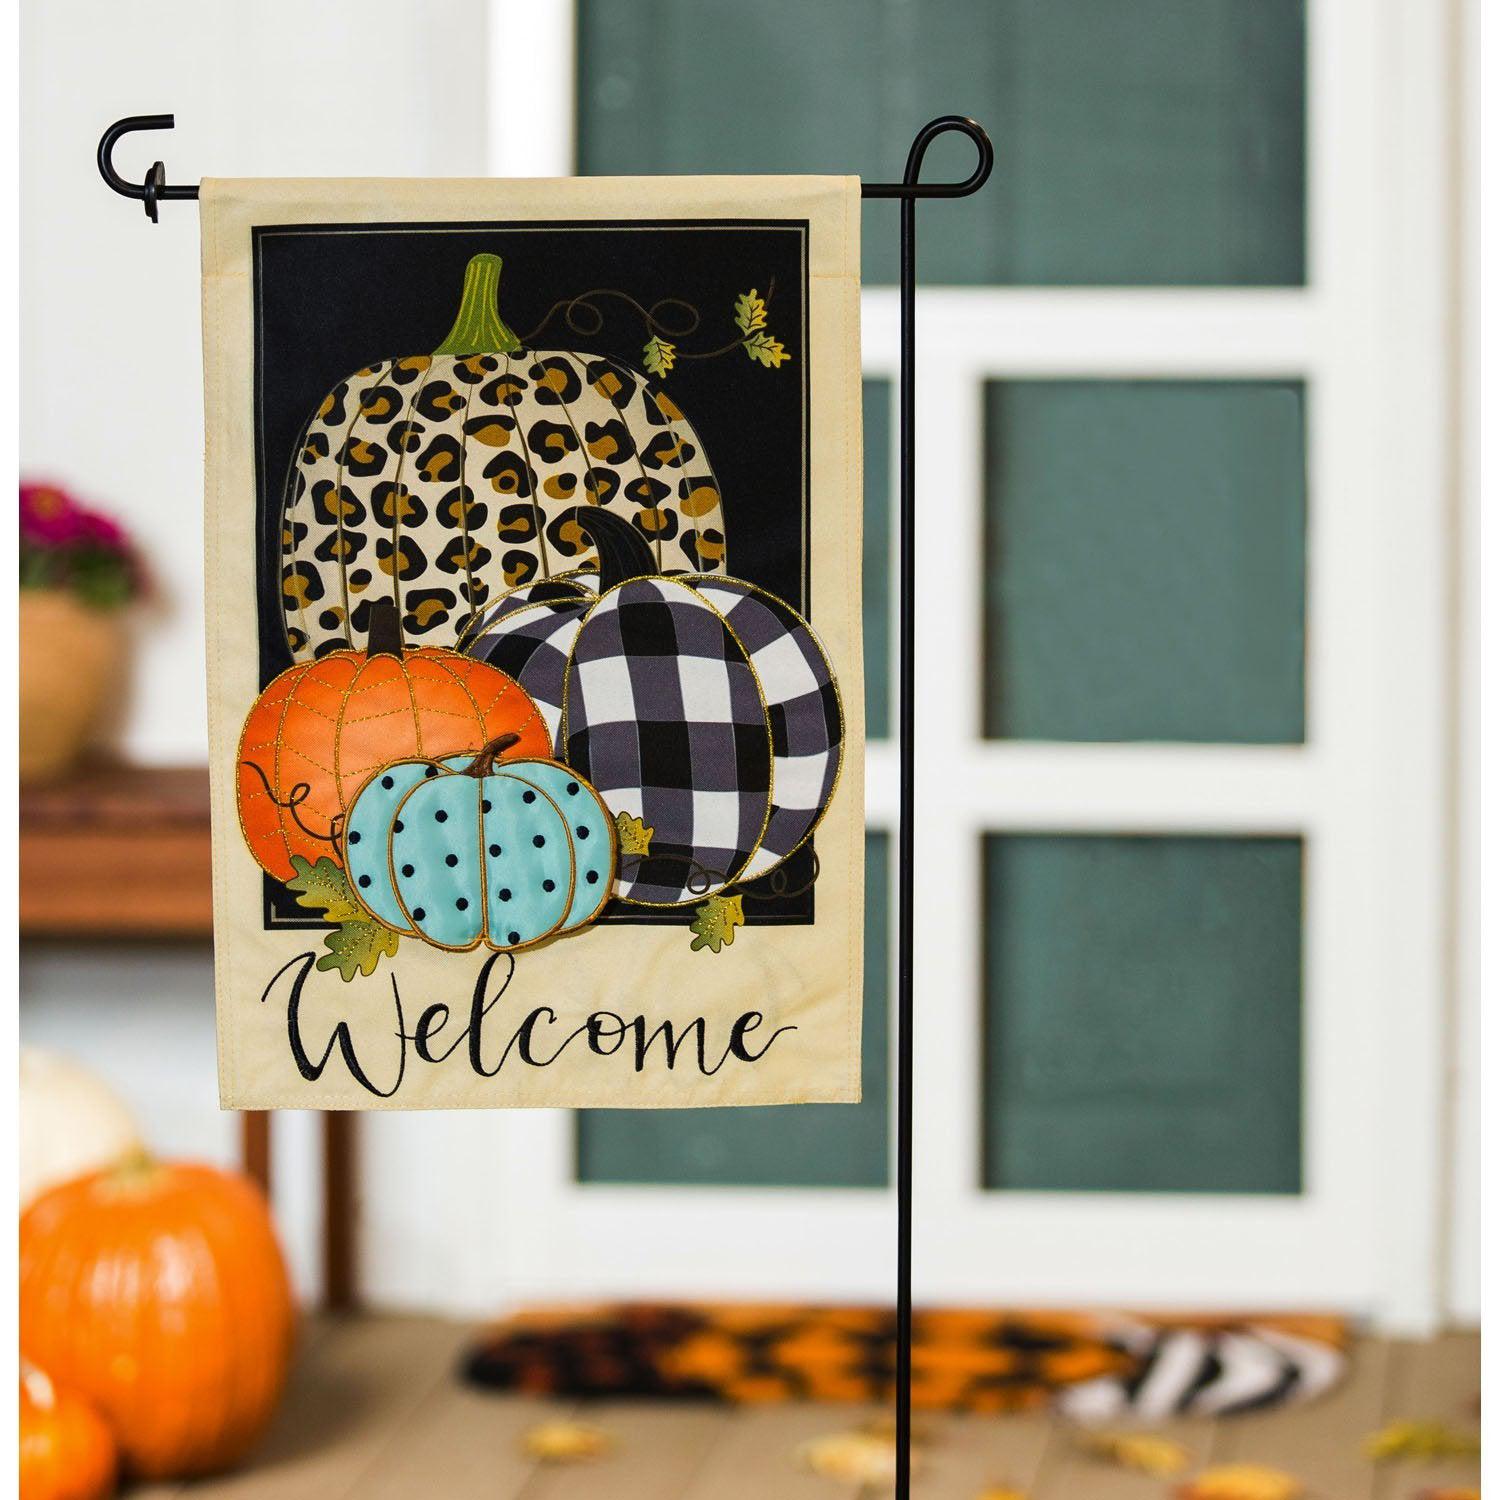 The Mixed Print Pumpkins garden flag features pumpkins in a variety of colors and patterns as well as the word "Welcome".